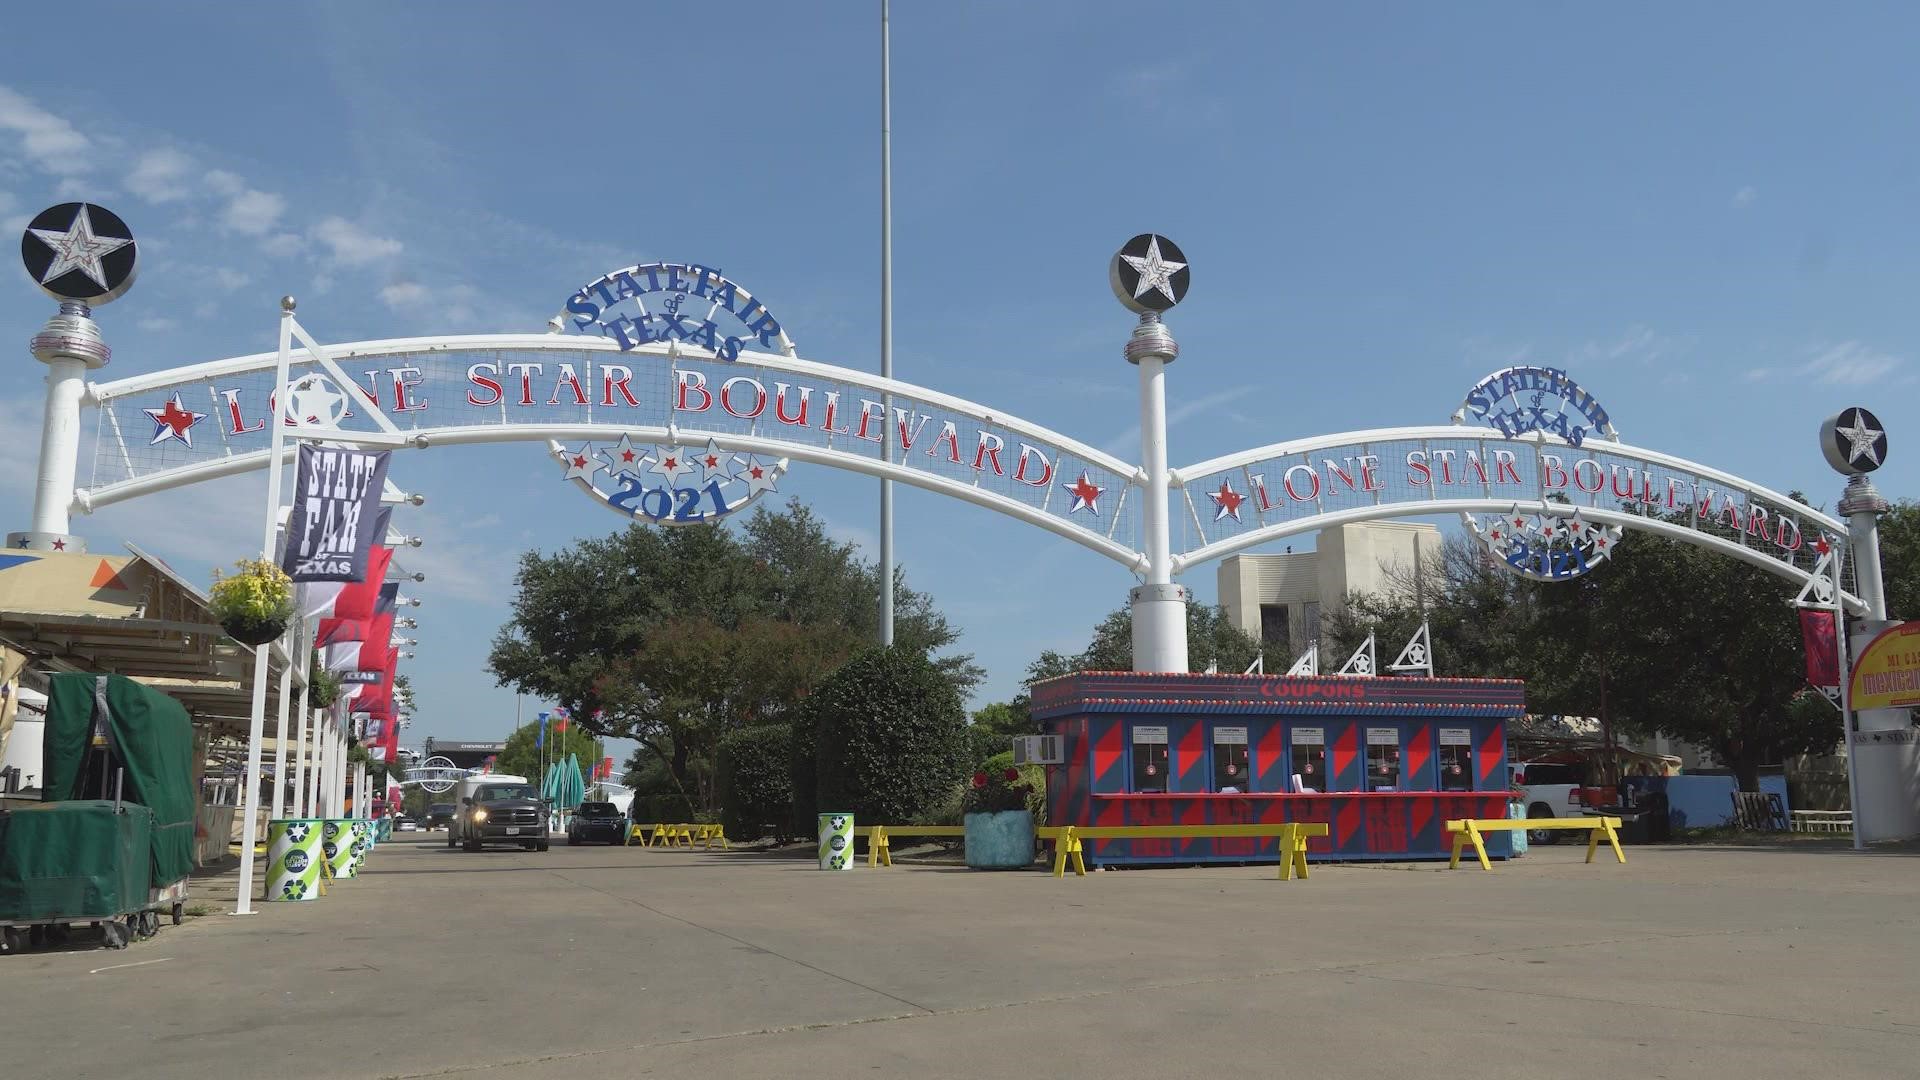 First things first, State Fair officials say to bring a mask! You will be asked at the gates if you have it, and masks will be required at all indoor facilities.